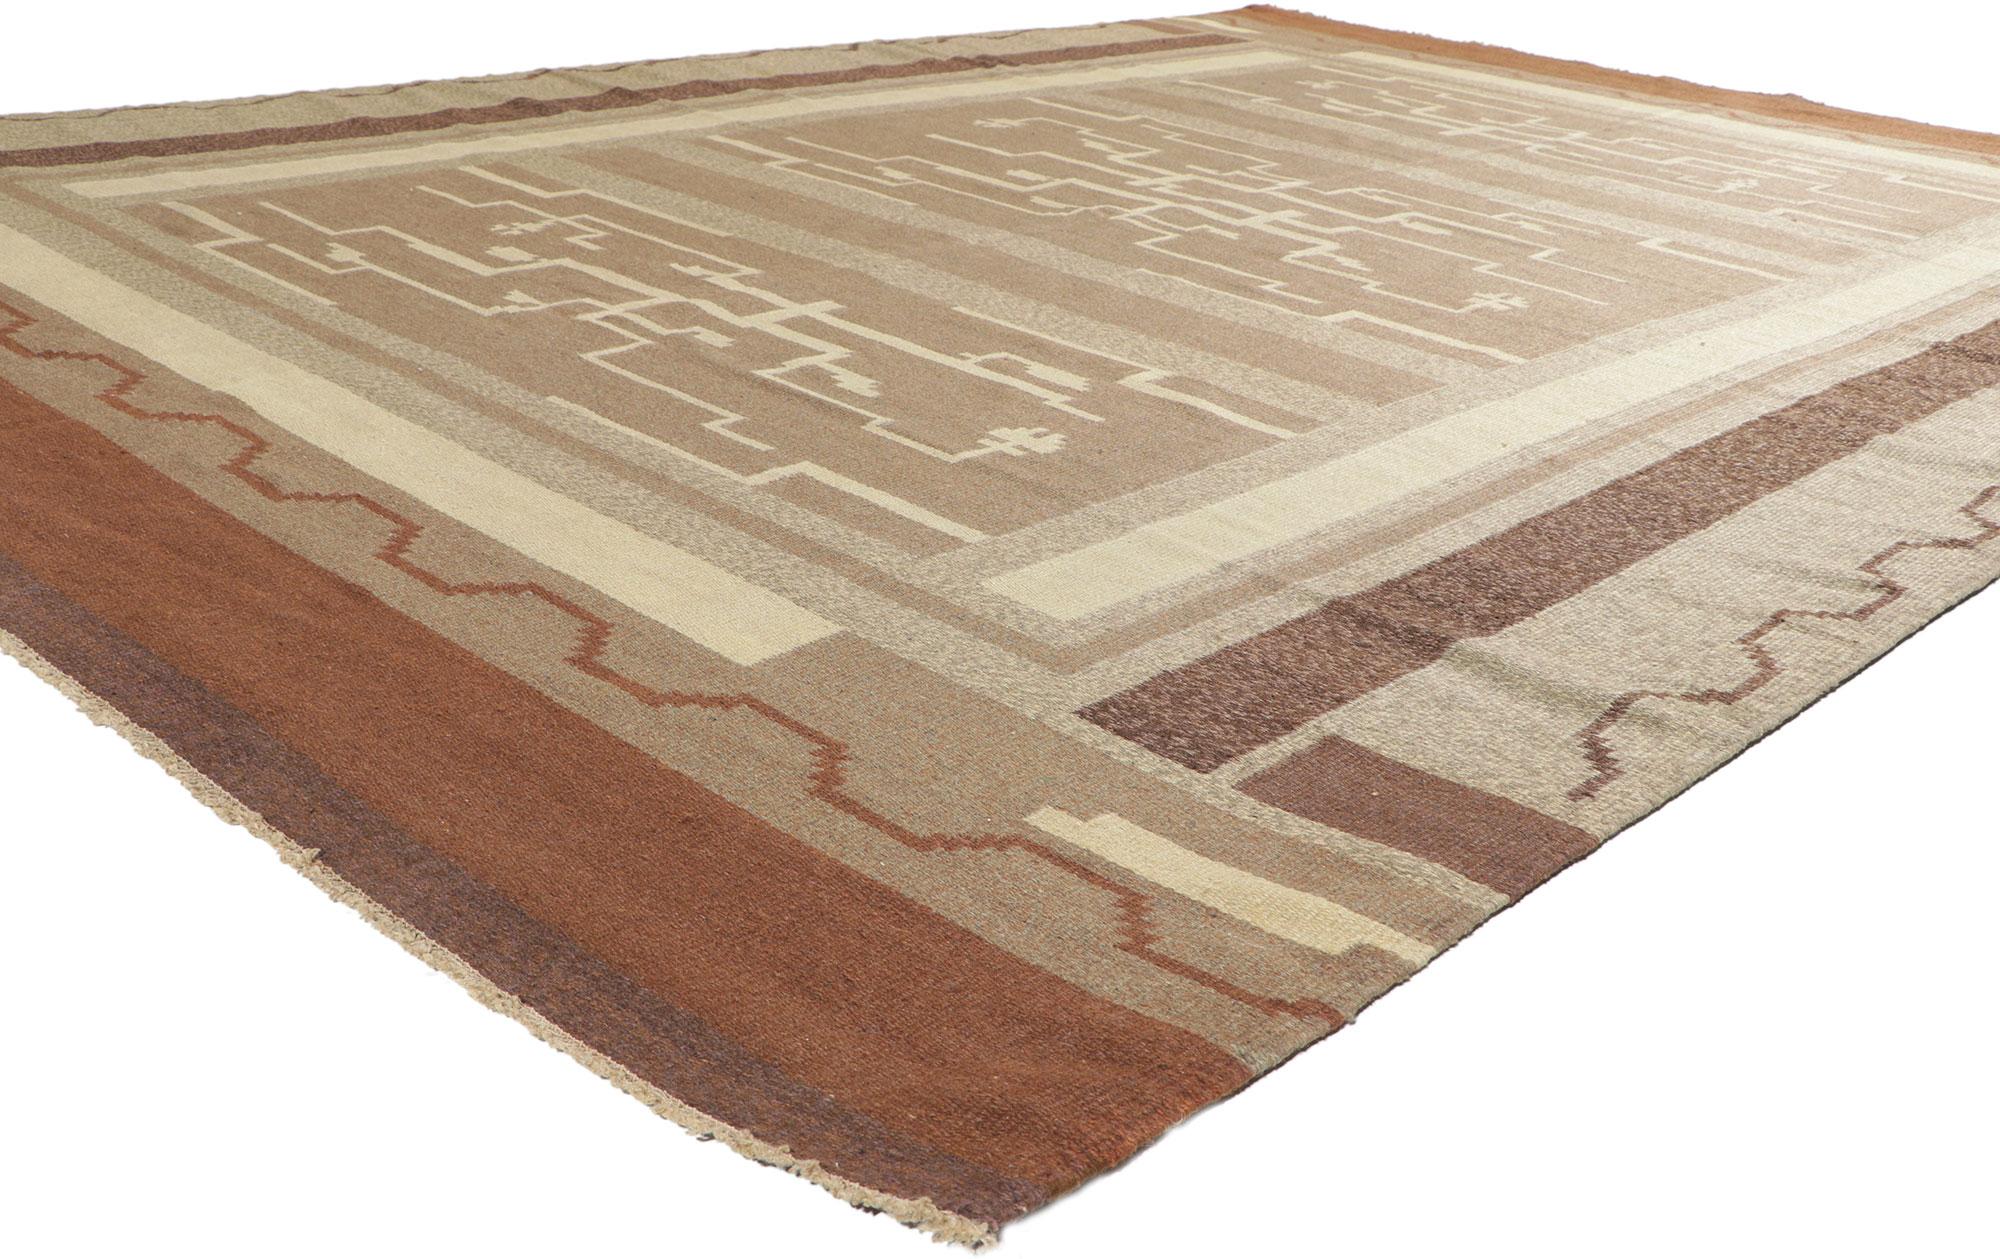 78506 Vintage Finnish Flatweave Greta Skogster-Lehtinen Rug, 08'00 x 11'04. Displaying simplicity with incredible detail and texture, this handwoven Finnish flatweave rug provides a feeling of cozy contentment without the clutter. The eye-catching